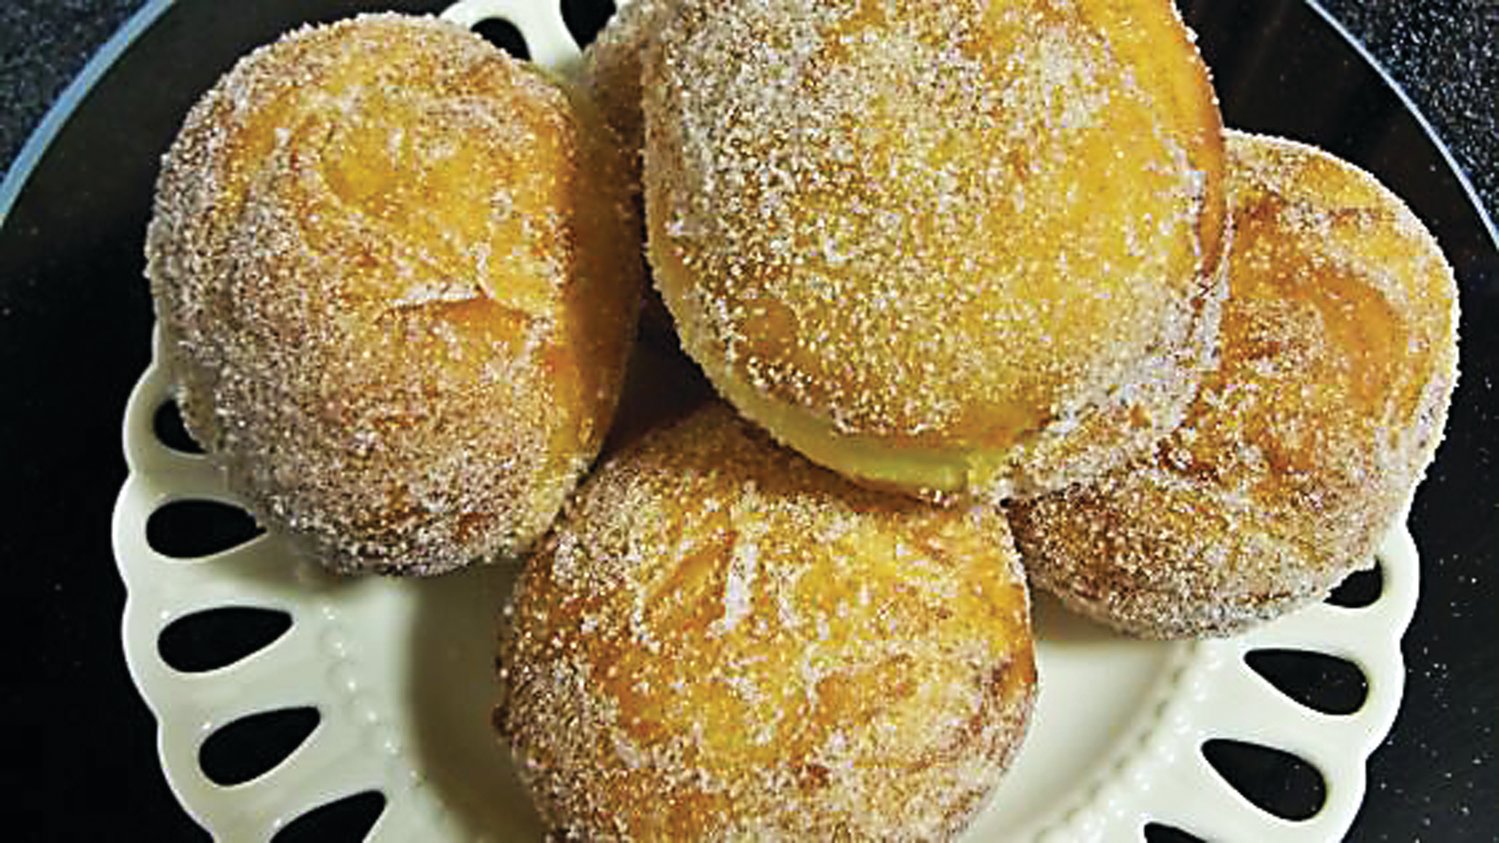 Fastnachts, the yeasty German doughnut, can be found at local doughnut shops and bakeries as well as Trauger’s Farm Market in Kintnersville. Or you can make them yourself. Photograph by Food.com.